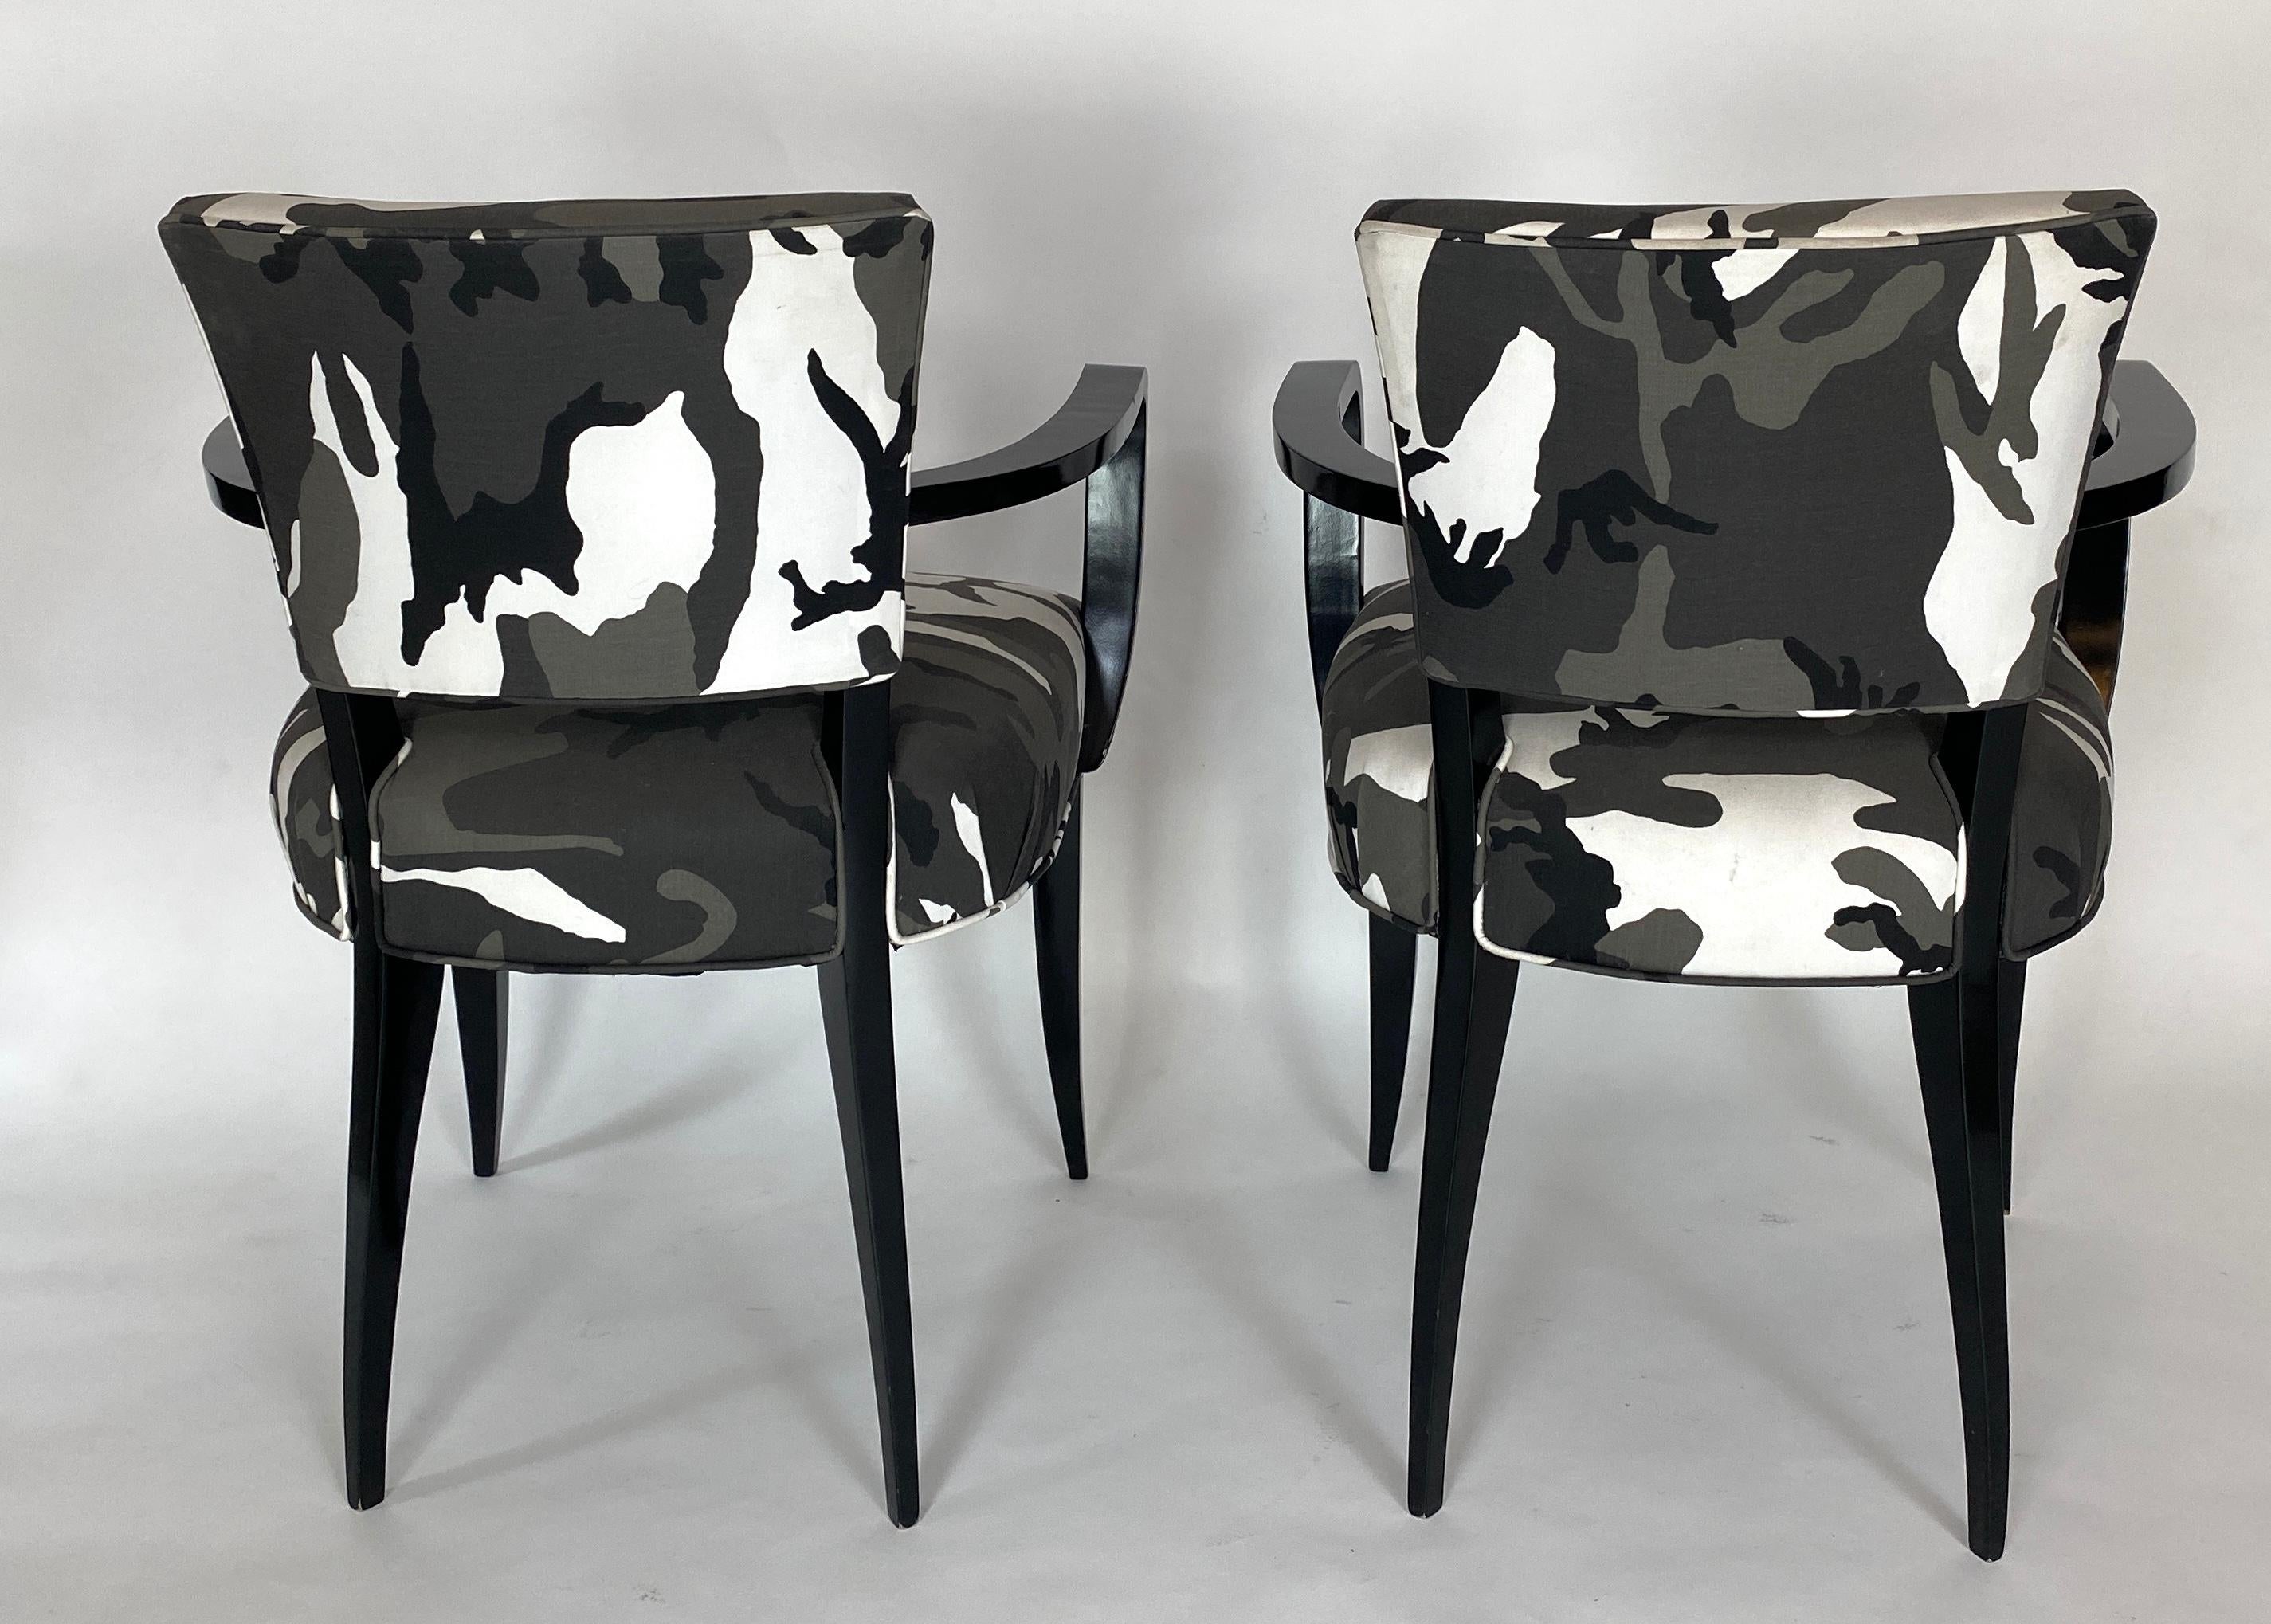 Pair of French 1940s bridge armchairs. Restored with a black lacquered finish and recovered with urban camouflage fabric. A classic armchair with a twist.